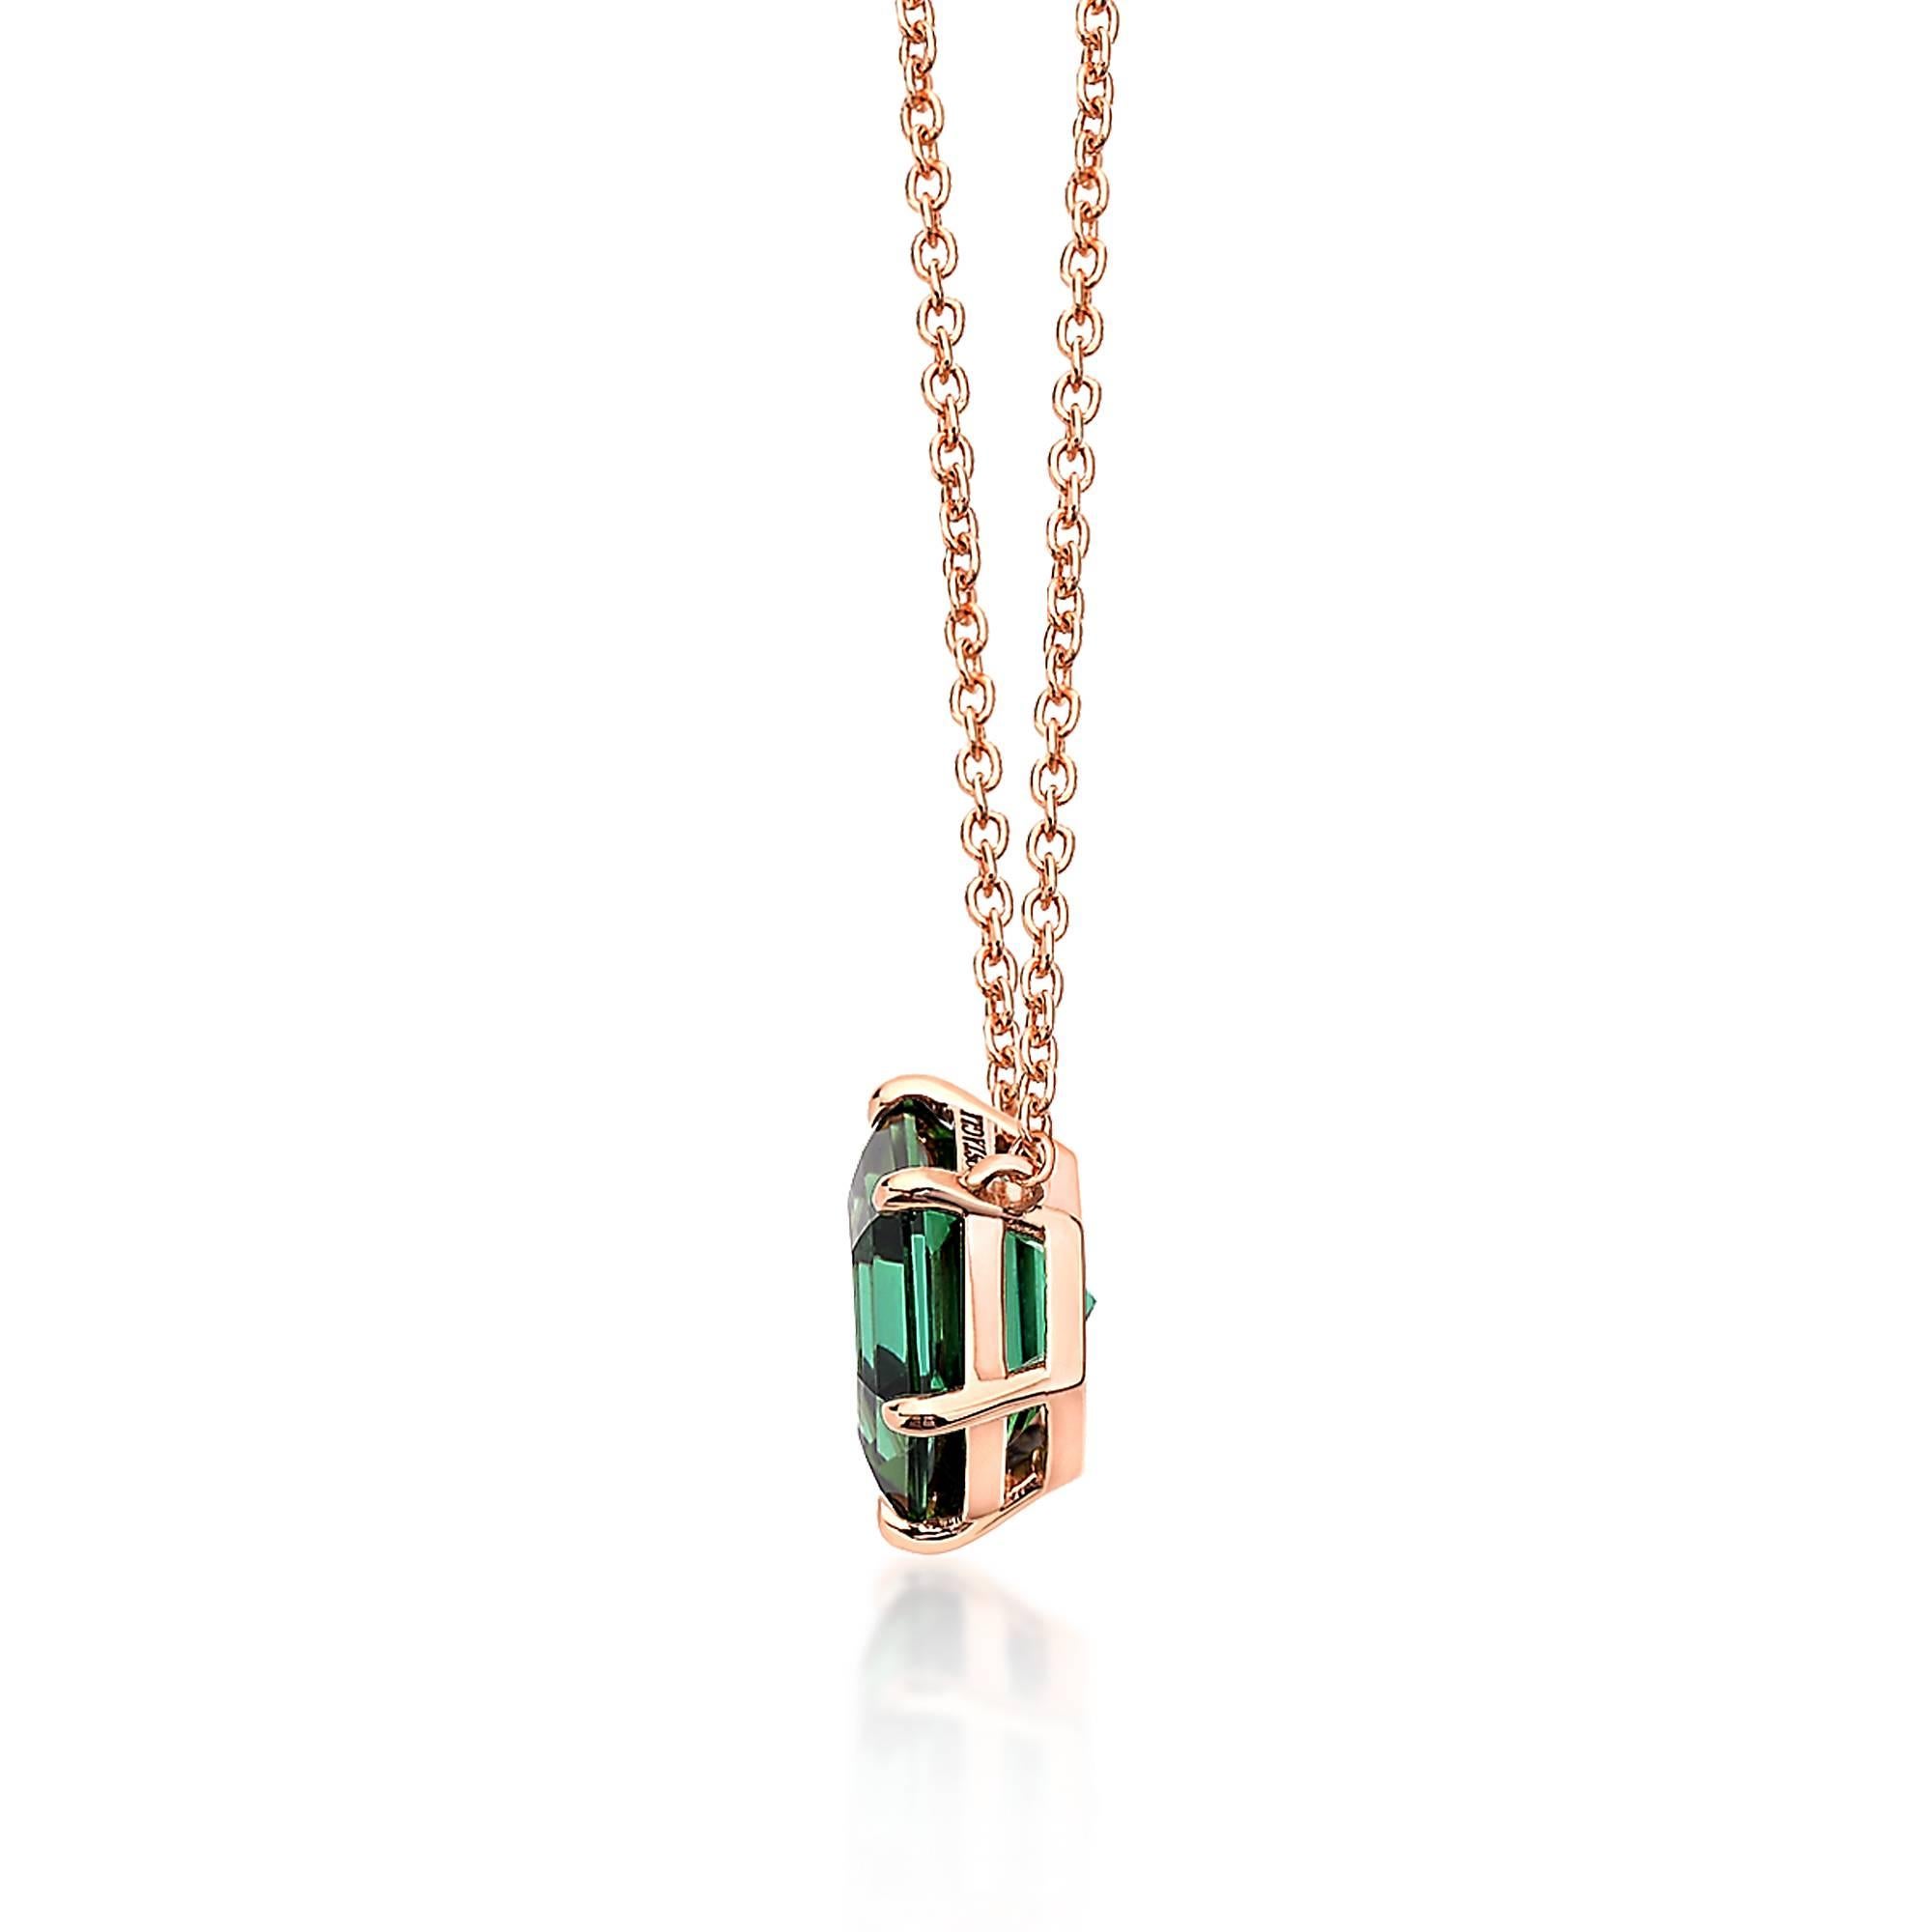 One of a kind hexagonal shape green tourmaline pendant necklace set in 18kt rose gold, weighing 3.15 carats.

A perfect gift for any occasion, from graduation to Valentine's Day, this 18kt rose gold green Tourmaline pendant will certainly be